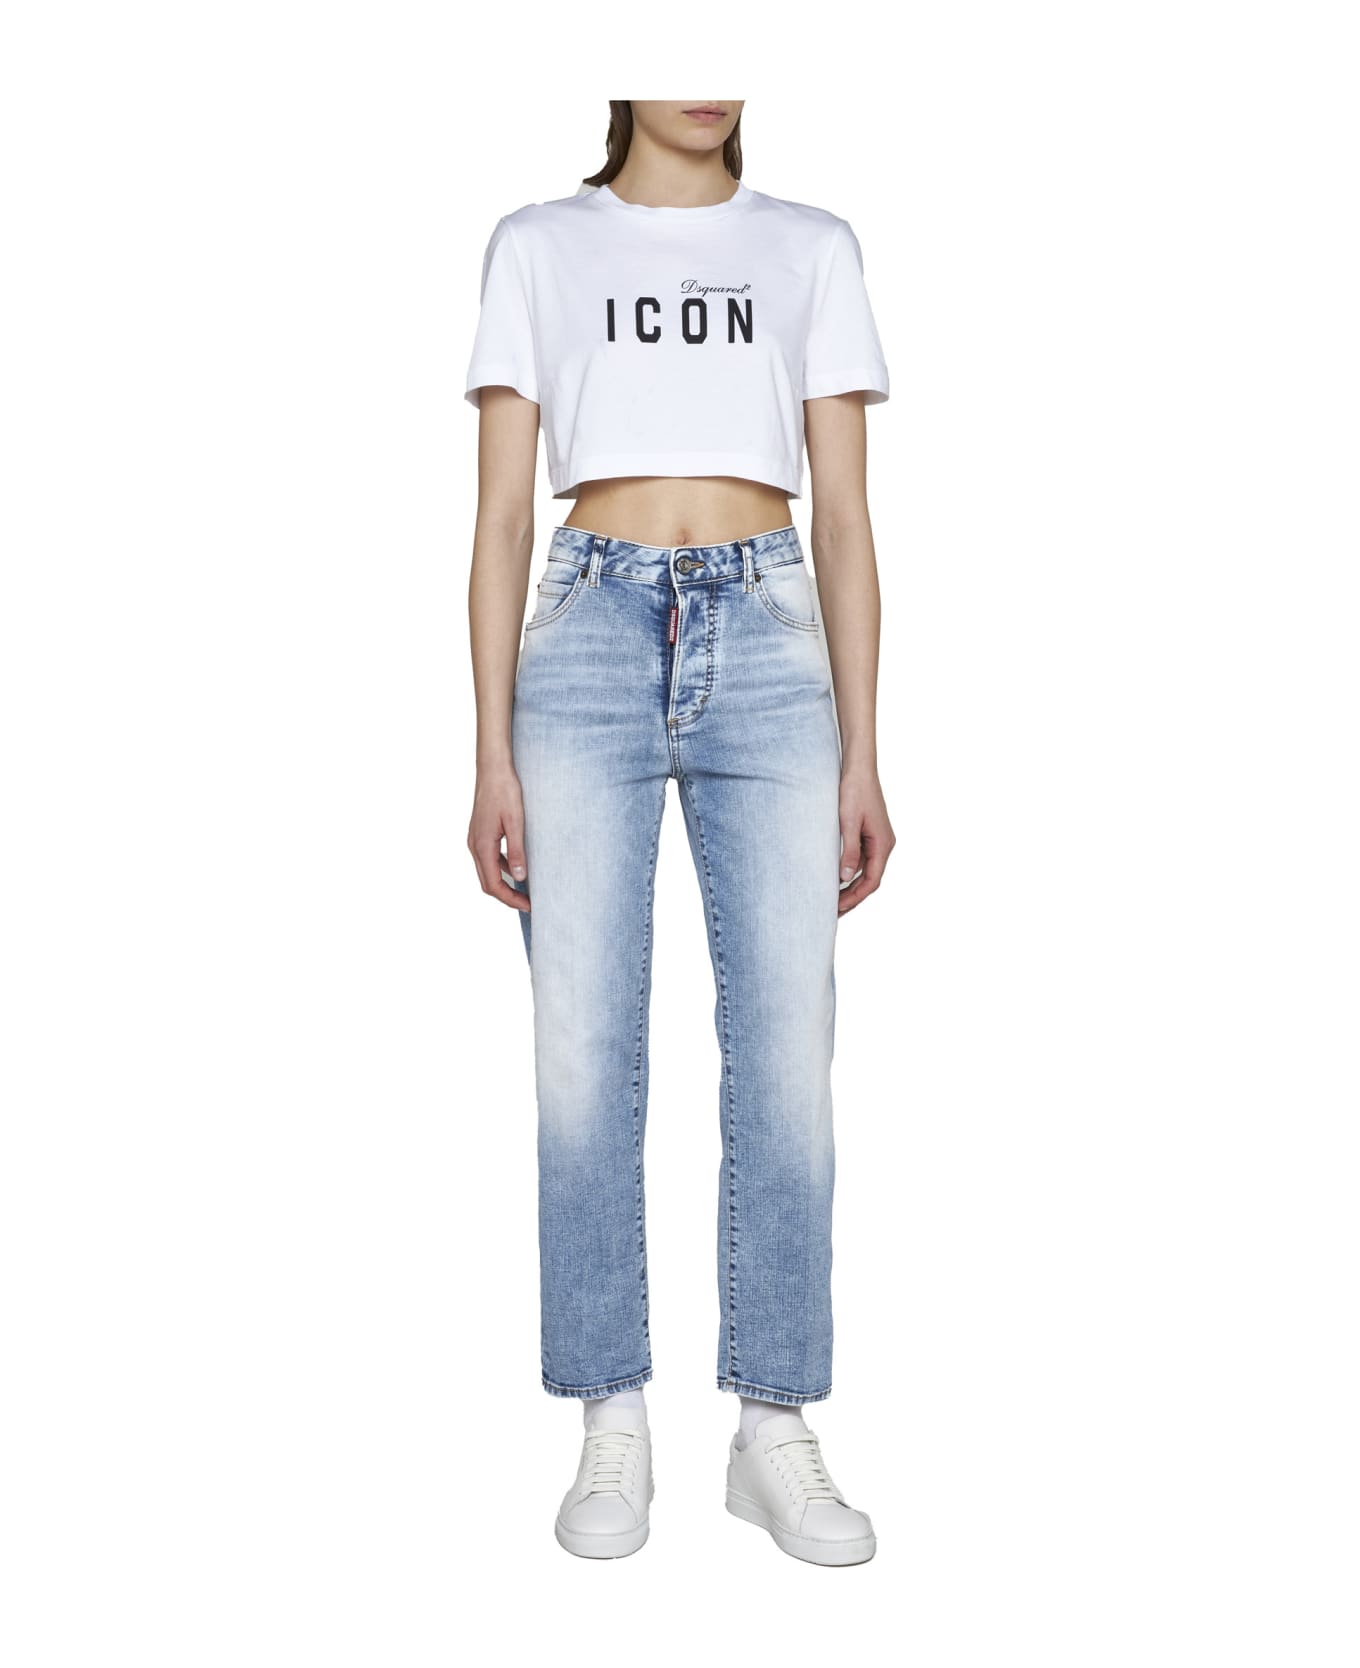 Dsquared2 Icon Jeans - Navy blue